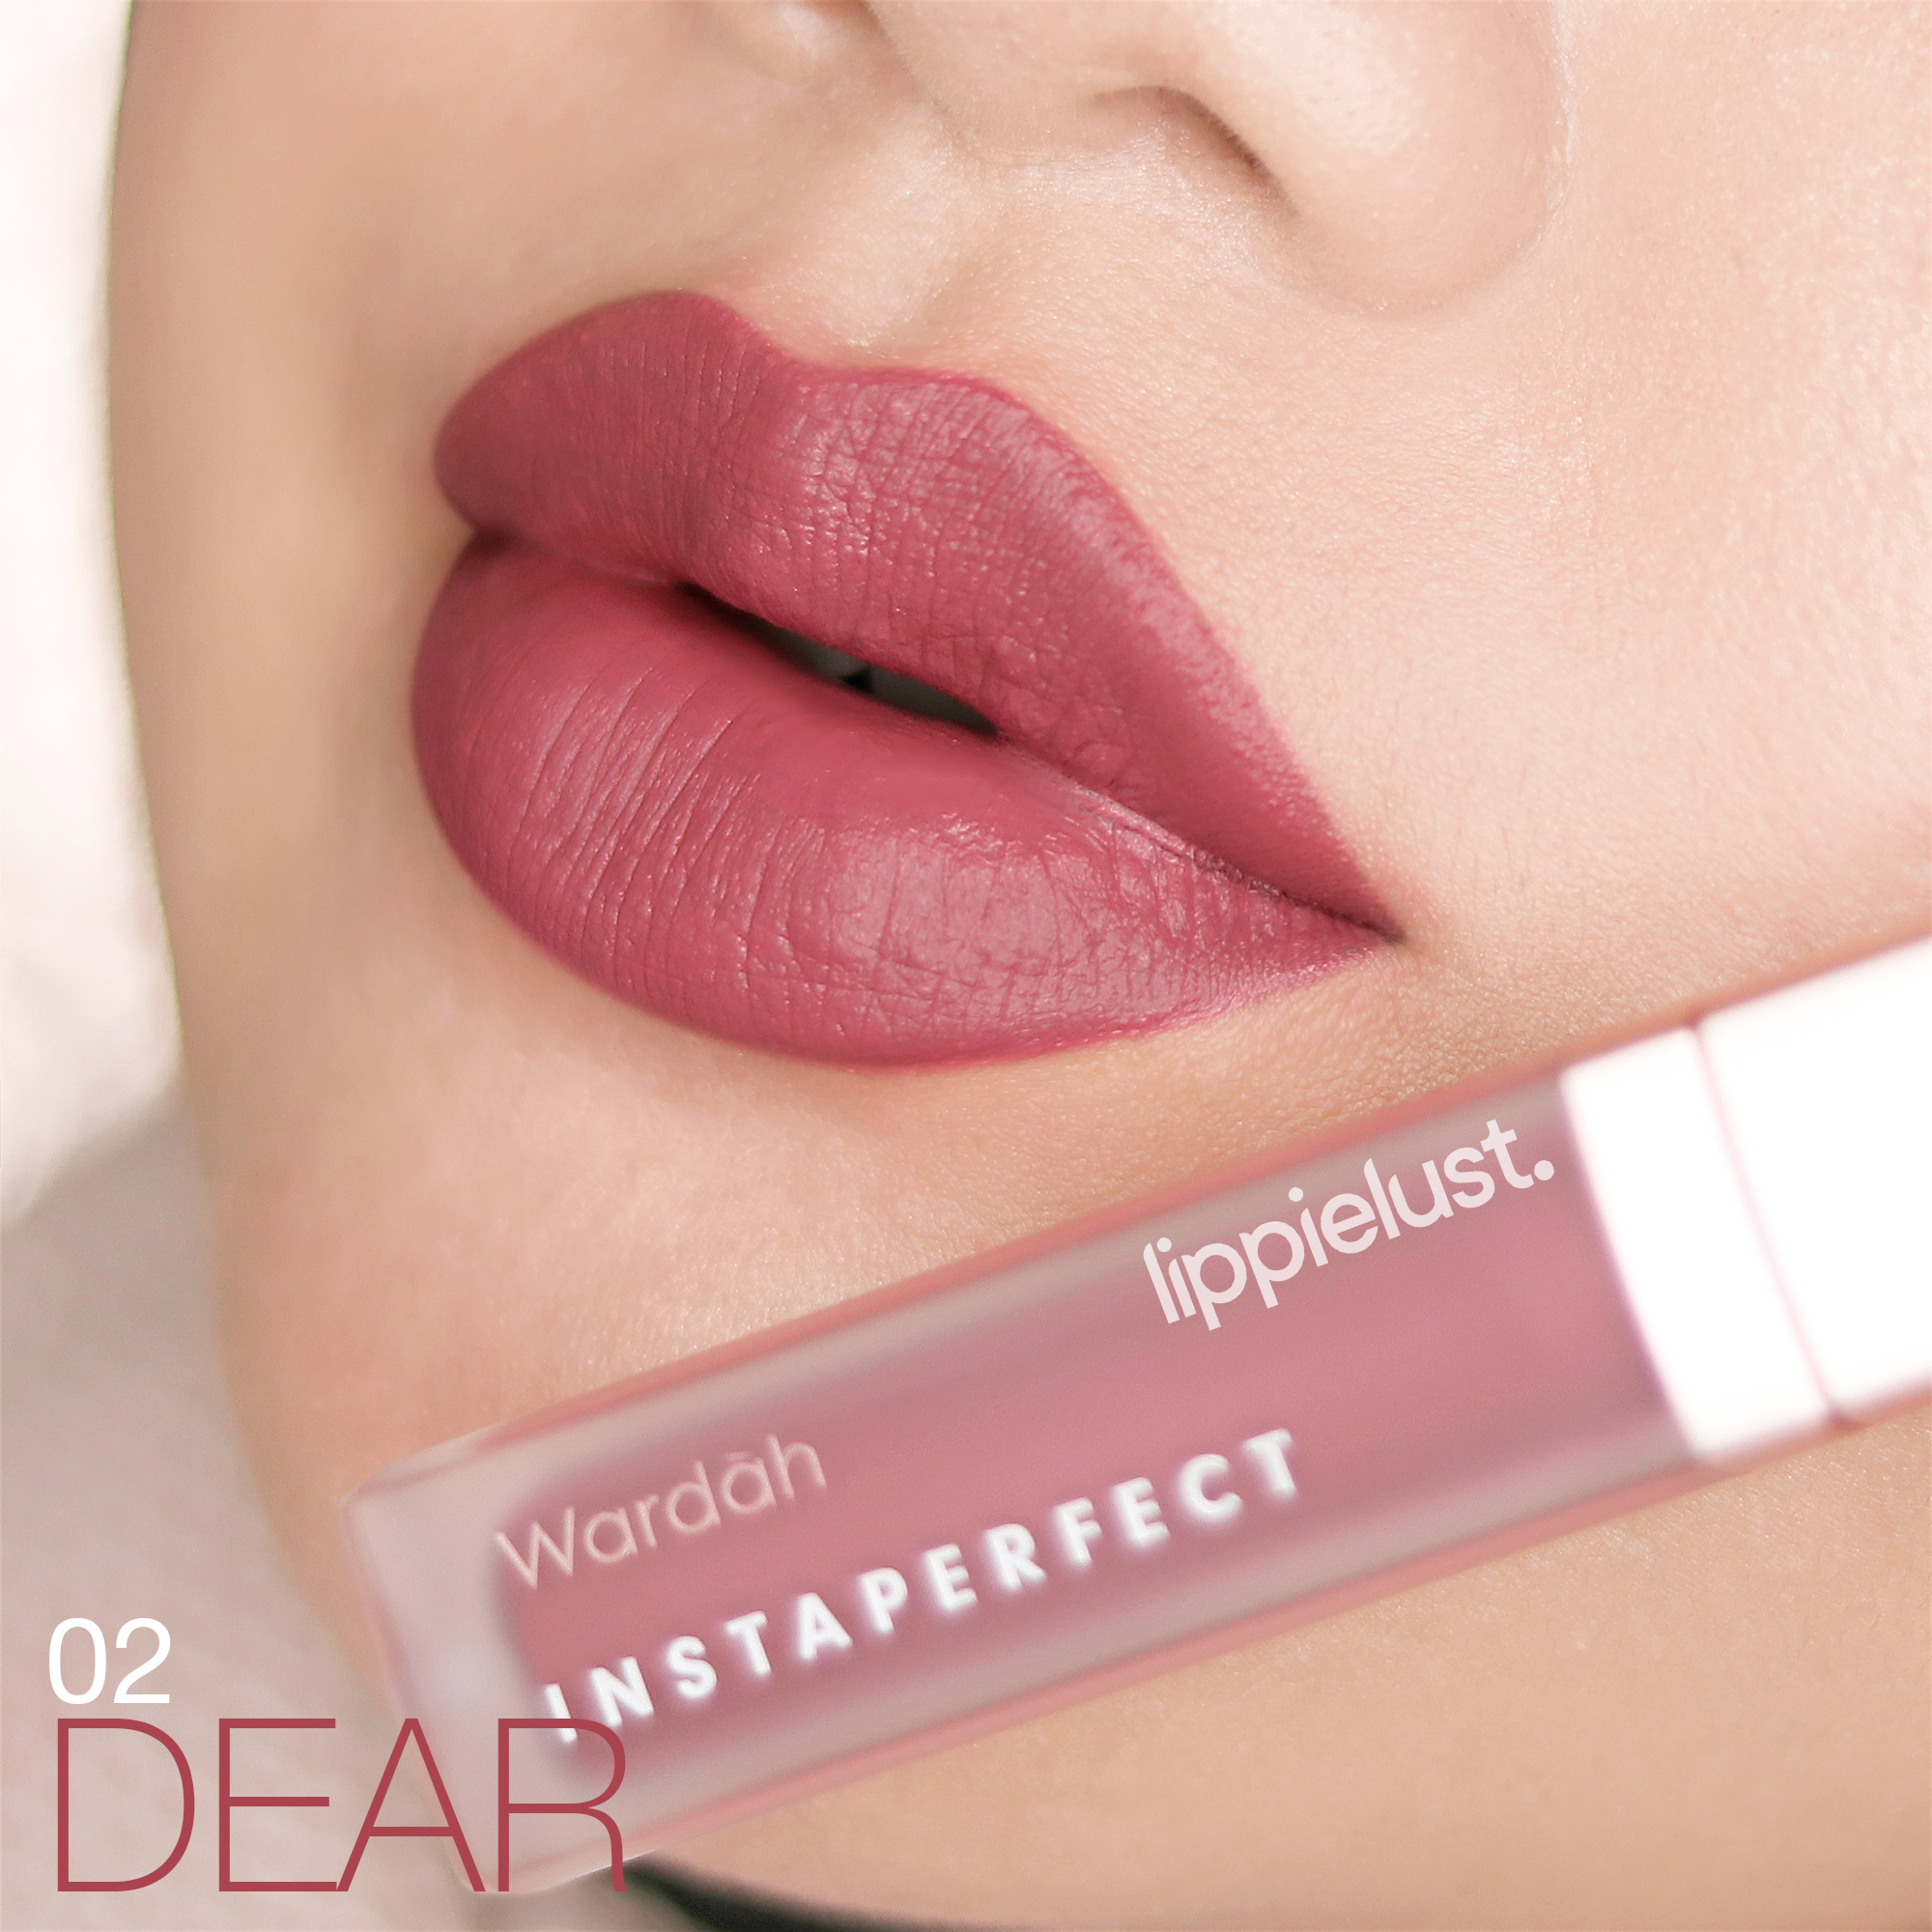 [REVIEW AND SWATCHES] WARDAH INSTAPERFECT MATTESETTER LIP